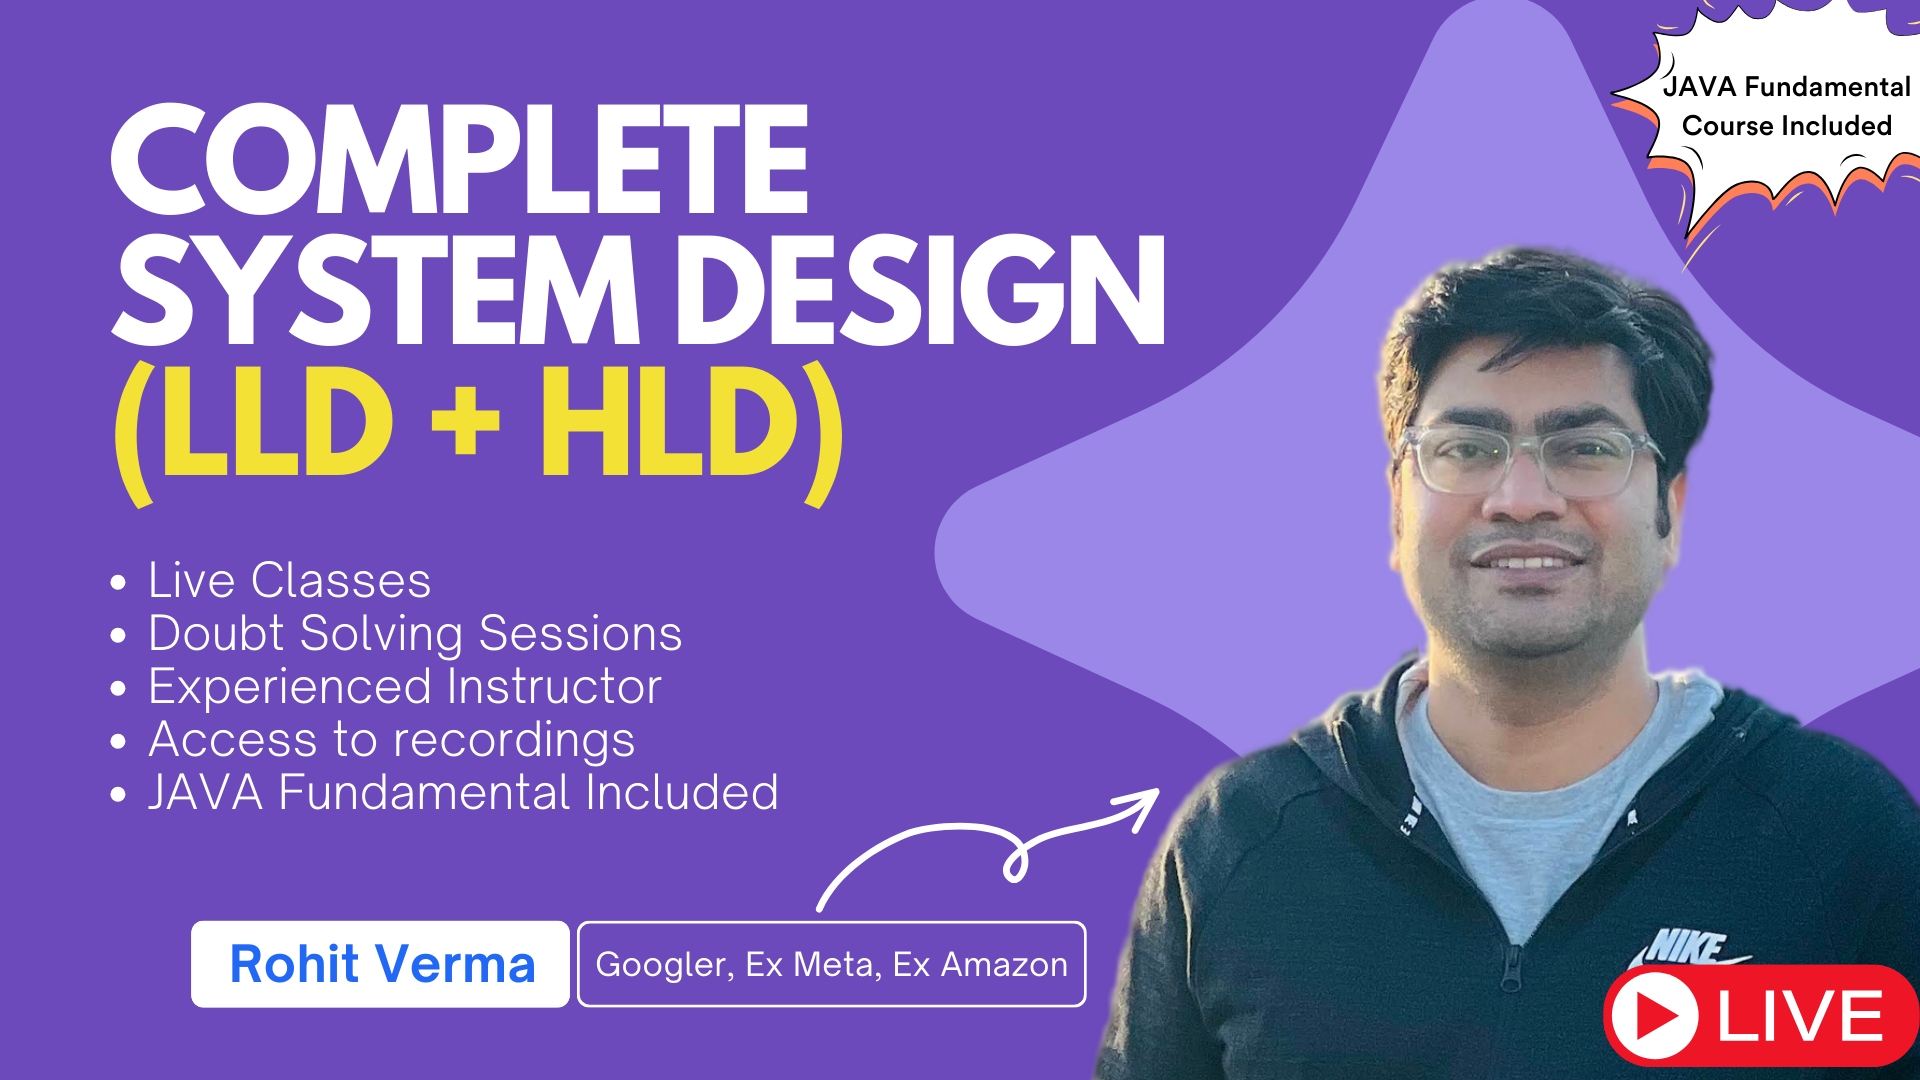 Complete System Design Course (LLD + HLD)